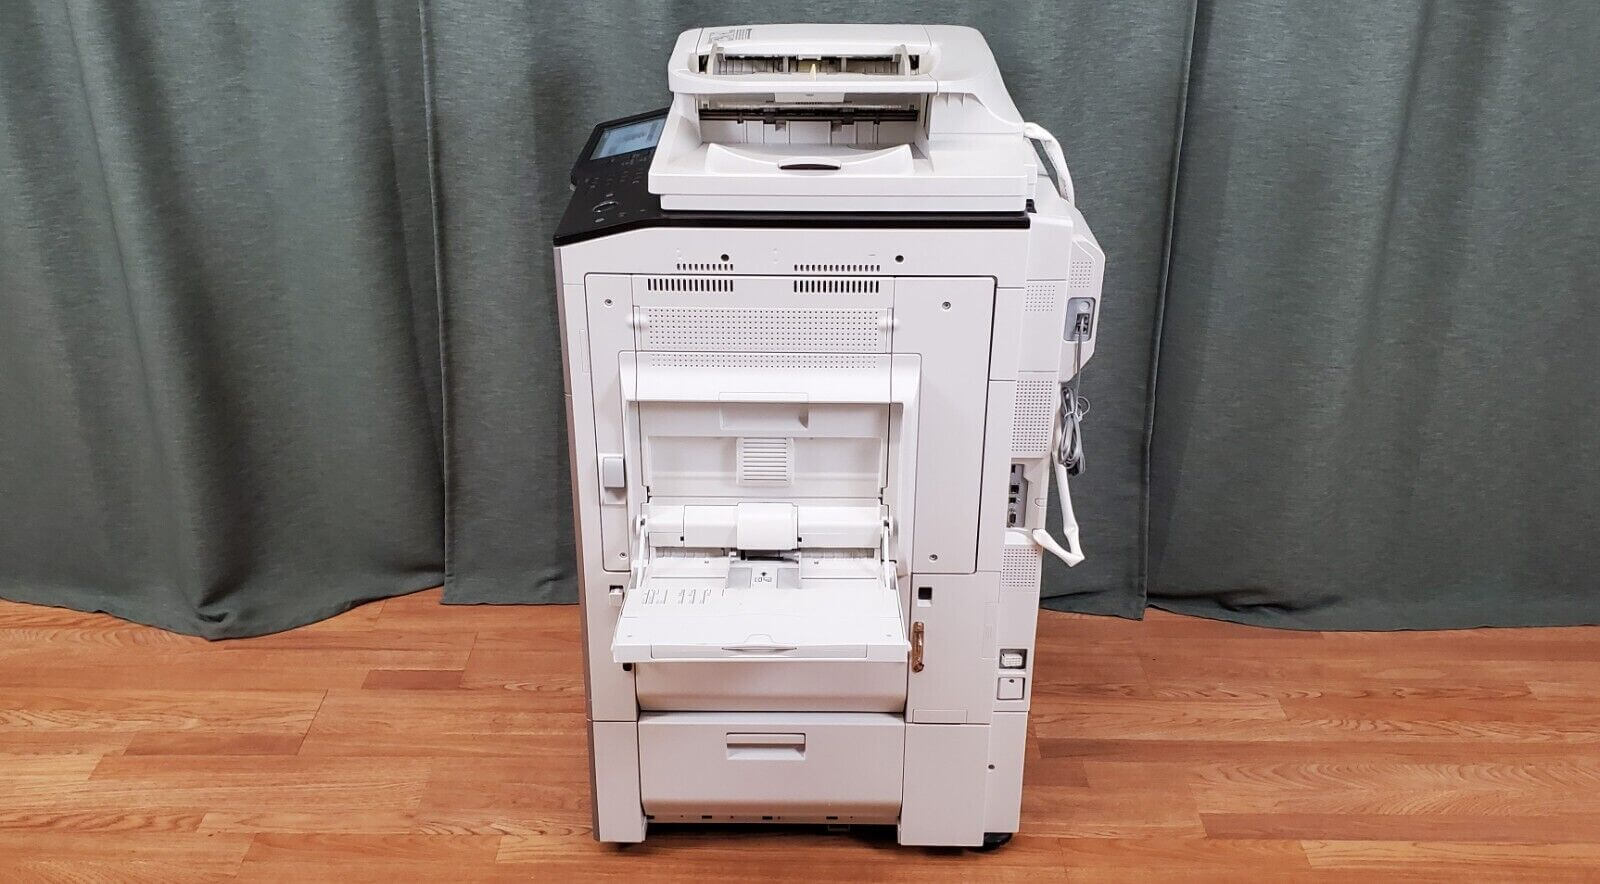 Sharp MX-M453N Black and White Copier Printer Scanner Fax Network Very Low 62k!! - copier-clearance-center